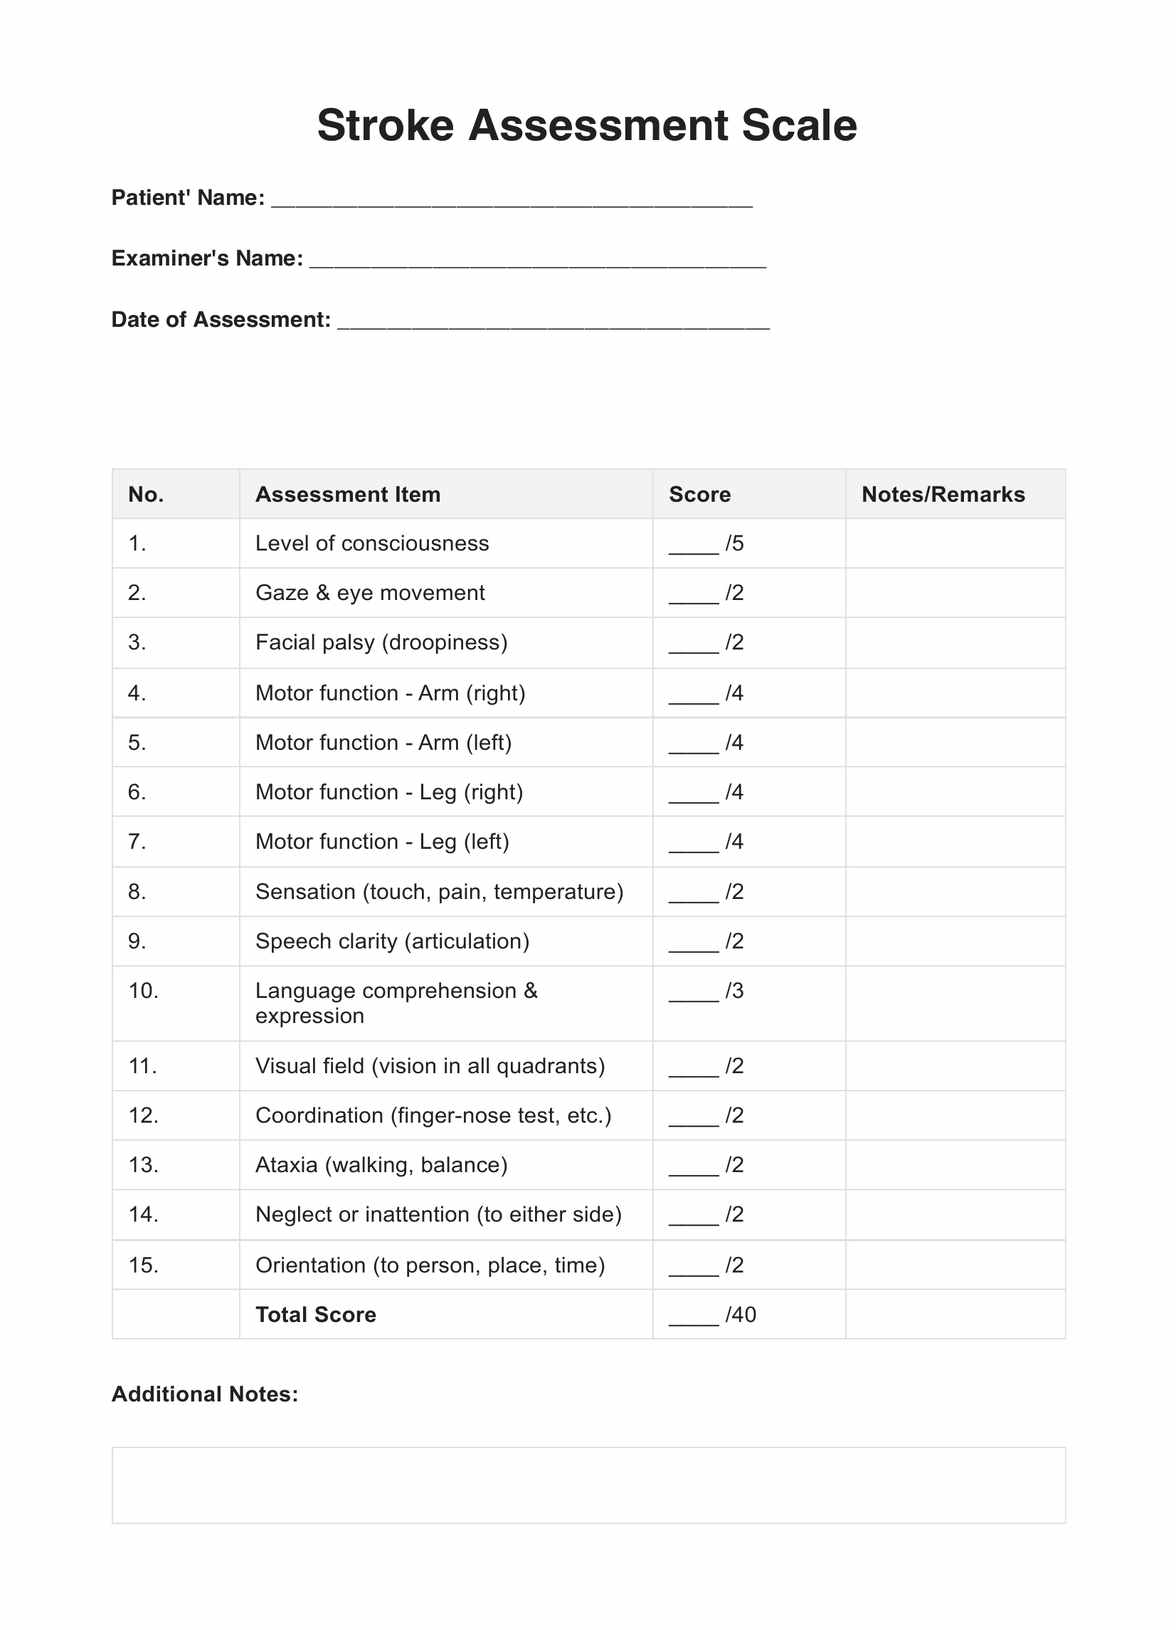 Stroke Assessment Scales PDF Example